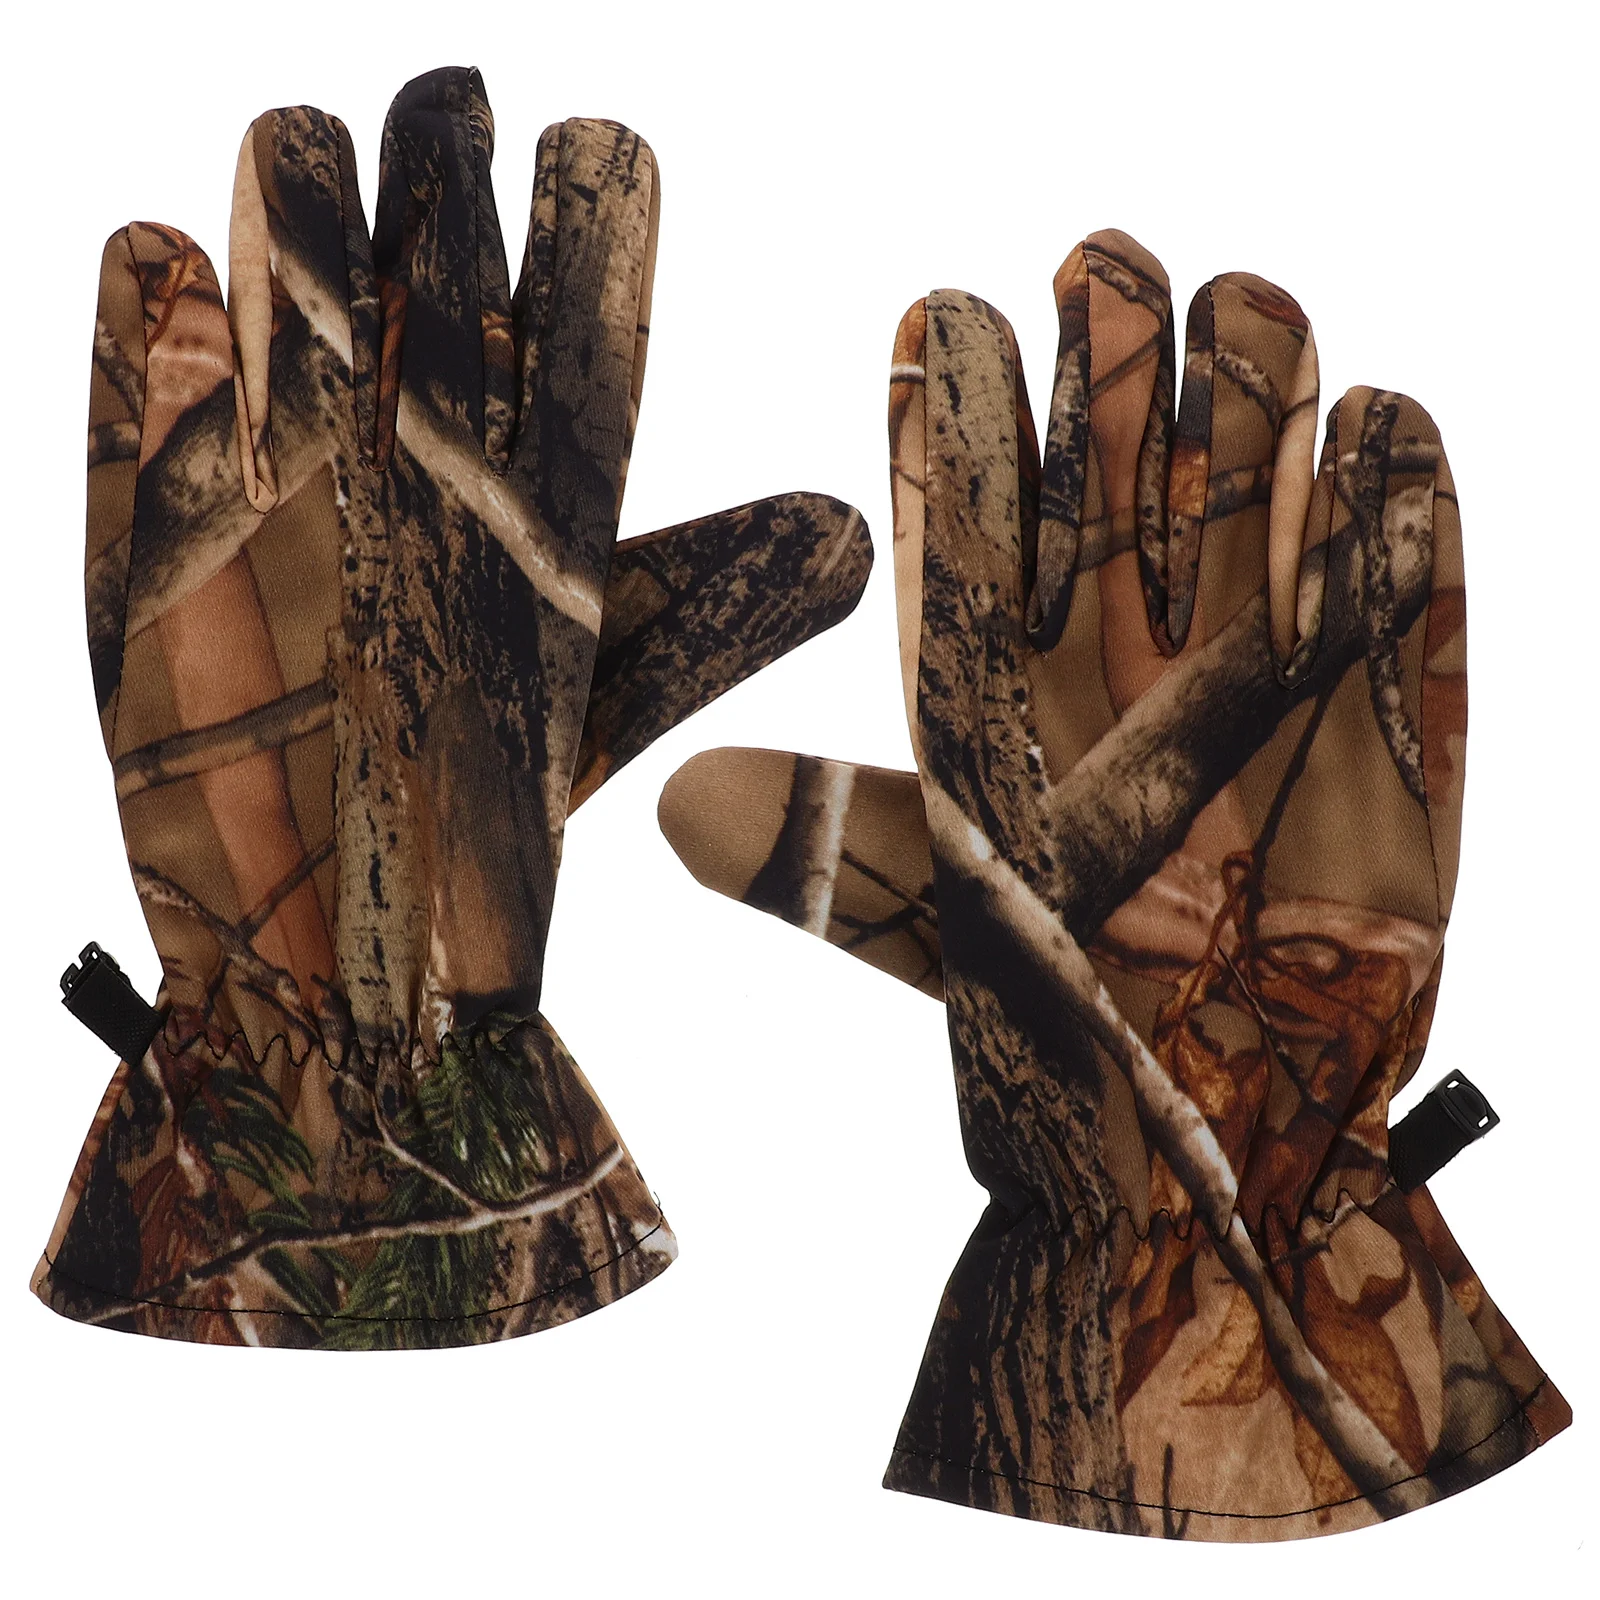 

Fishing Mens Gloves Hunting Camo Men Youth Camouflage For Wool Lightweight Shooting Boys Archery Outdoor Gear Full Finger